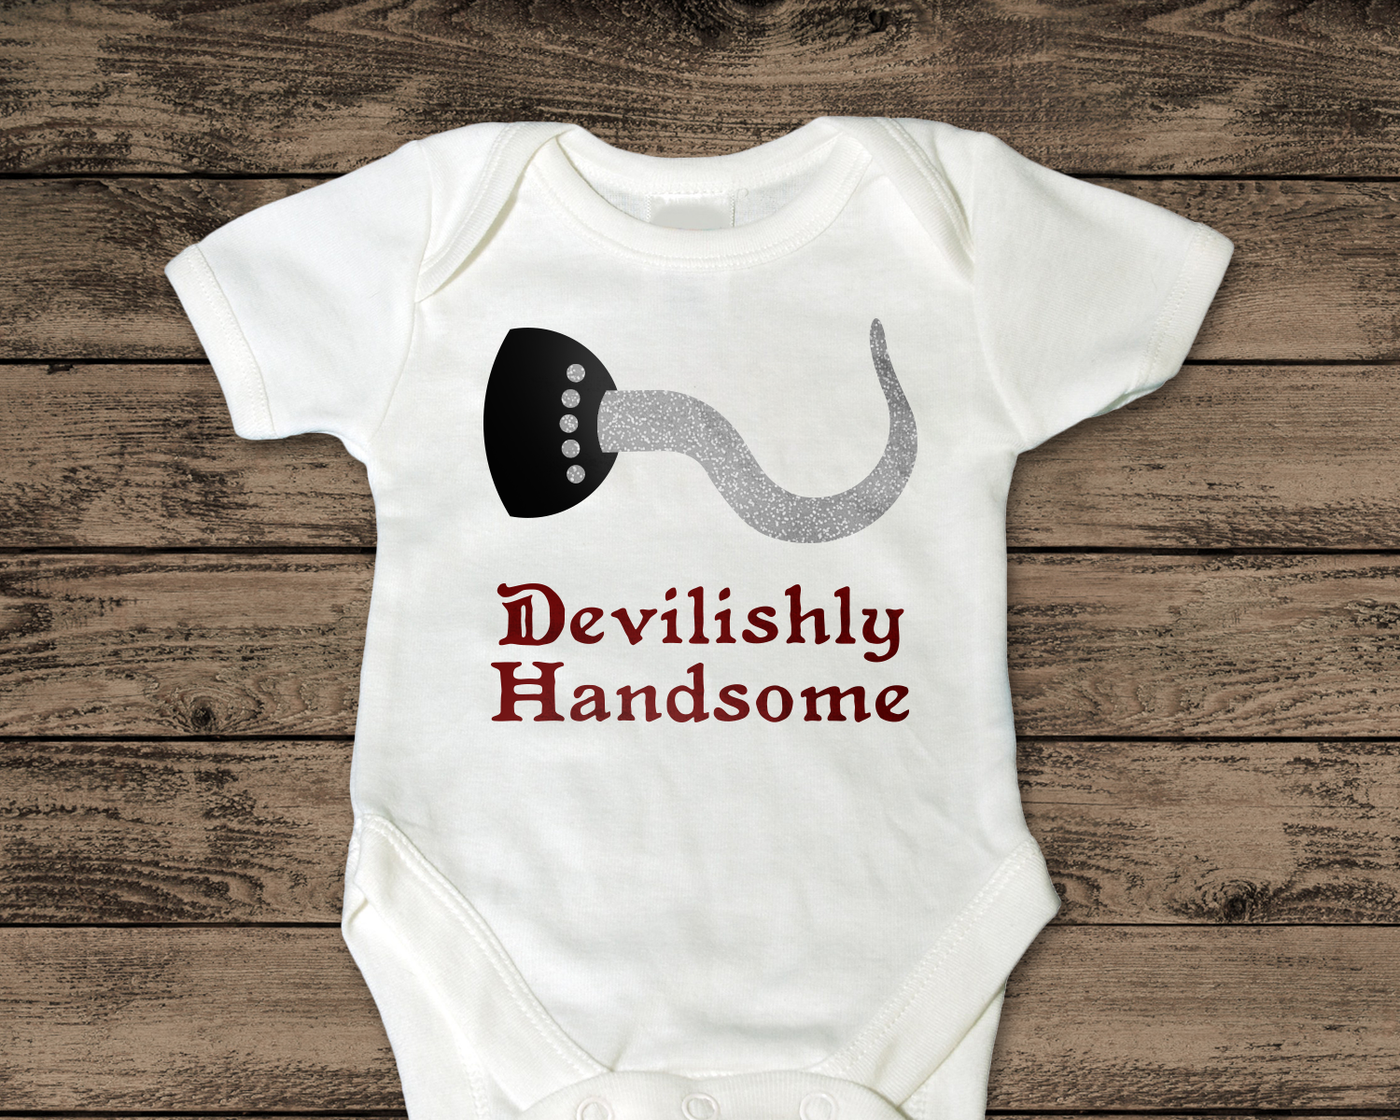 A white baby onesie with the words "Devilishly Handsome" with a pirate hook above.